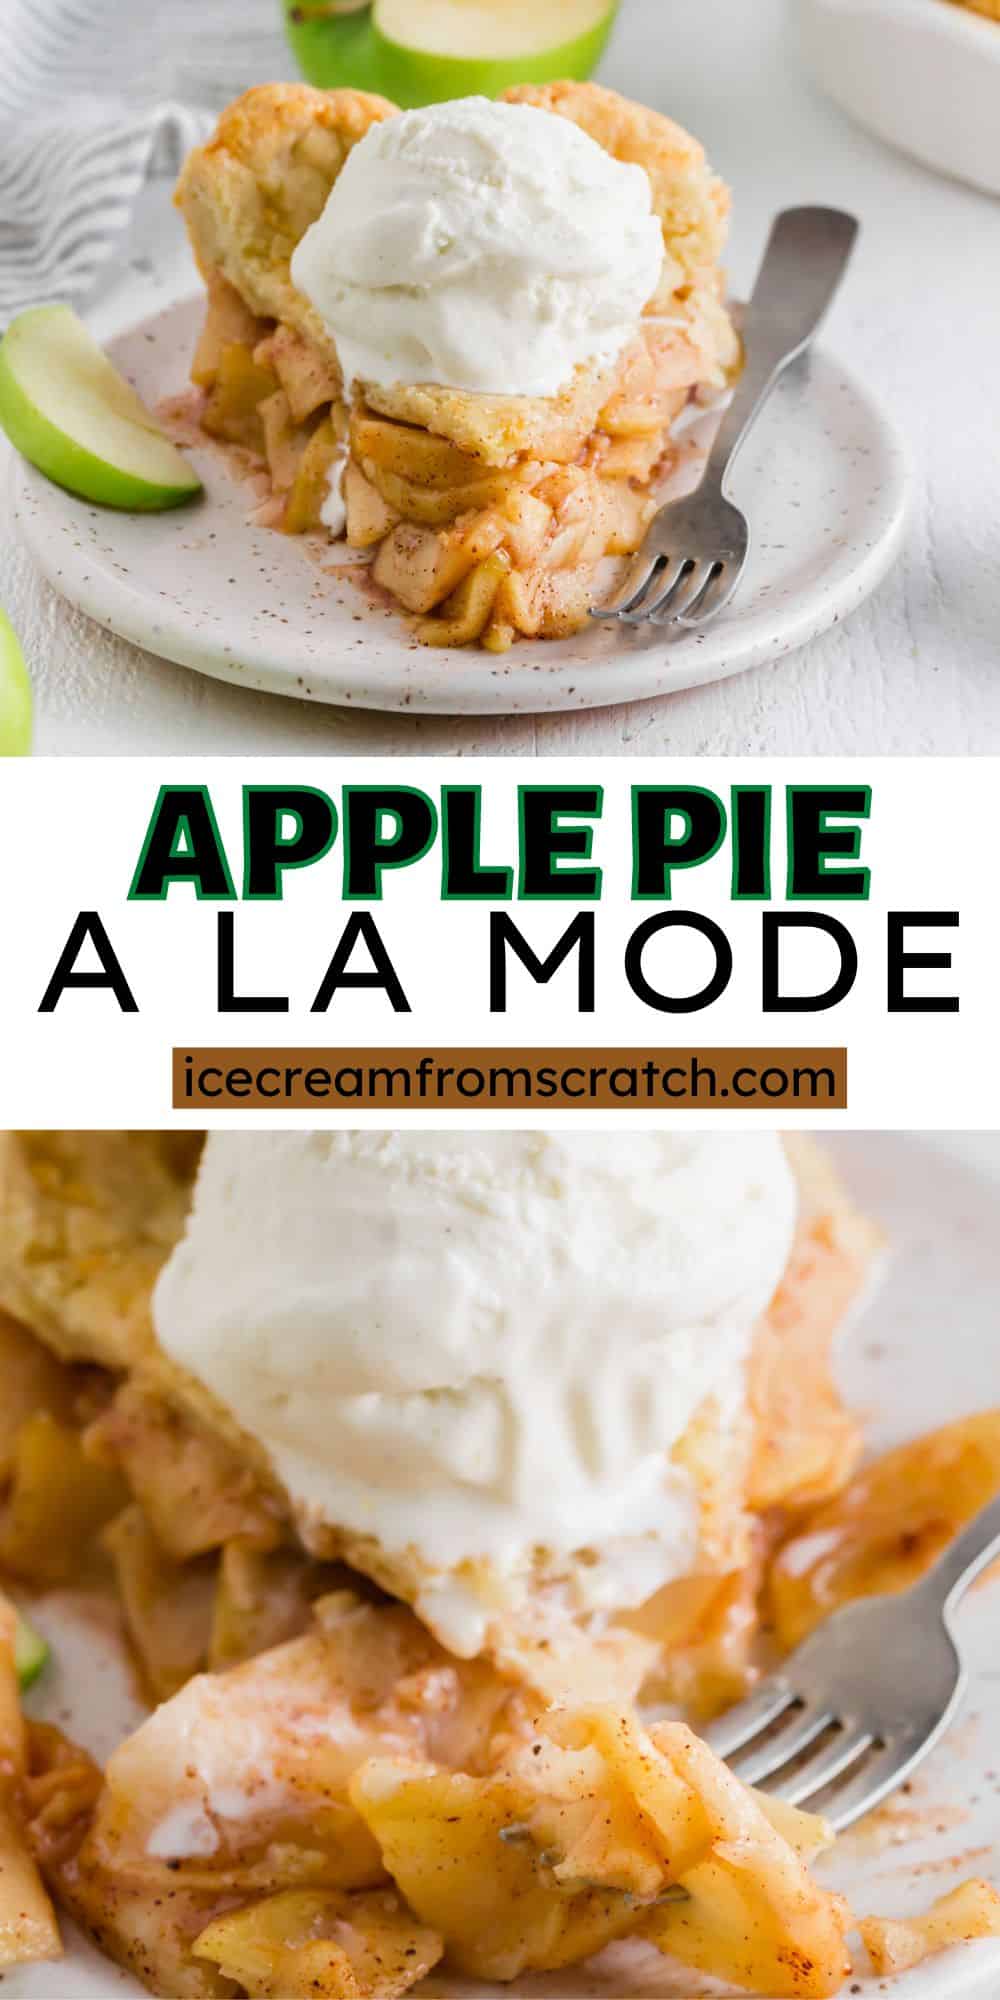 Two photos of apple pie with ice cream on top. Text in center of image says "apple pie a la mode"